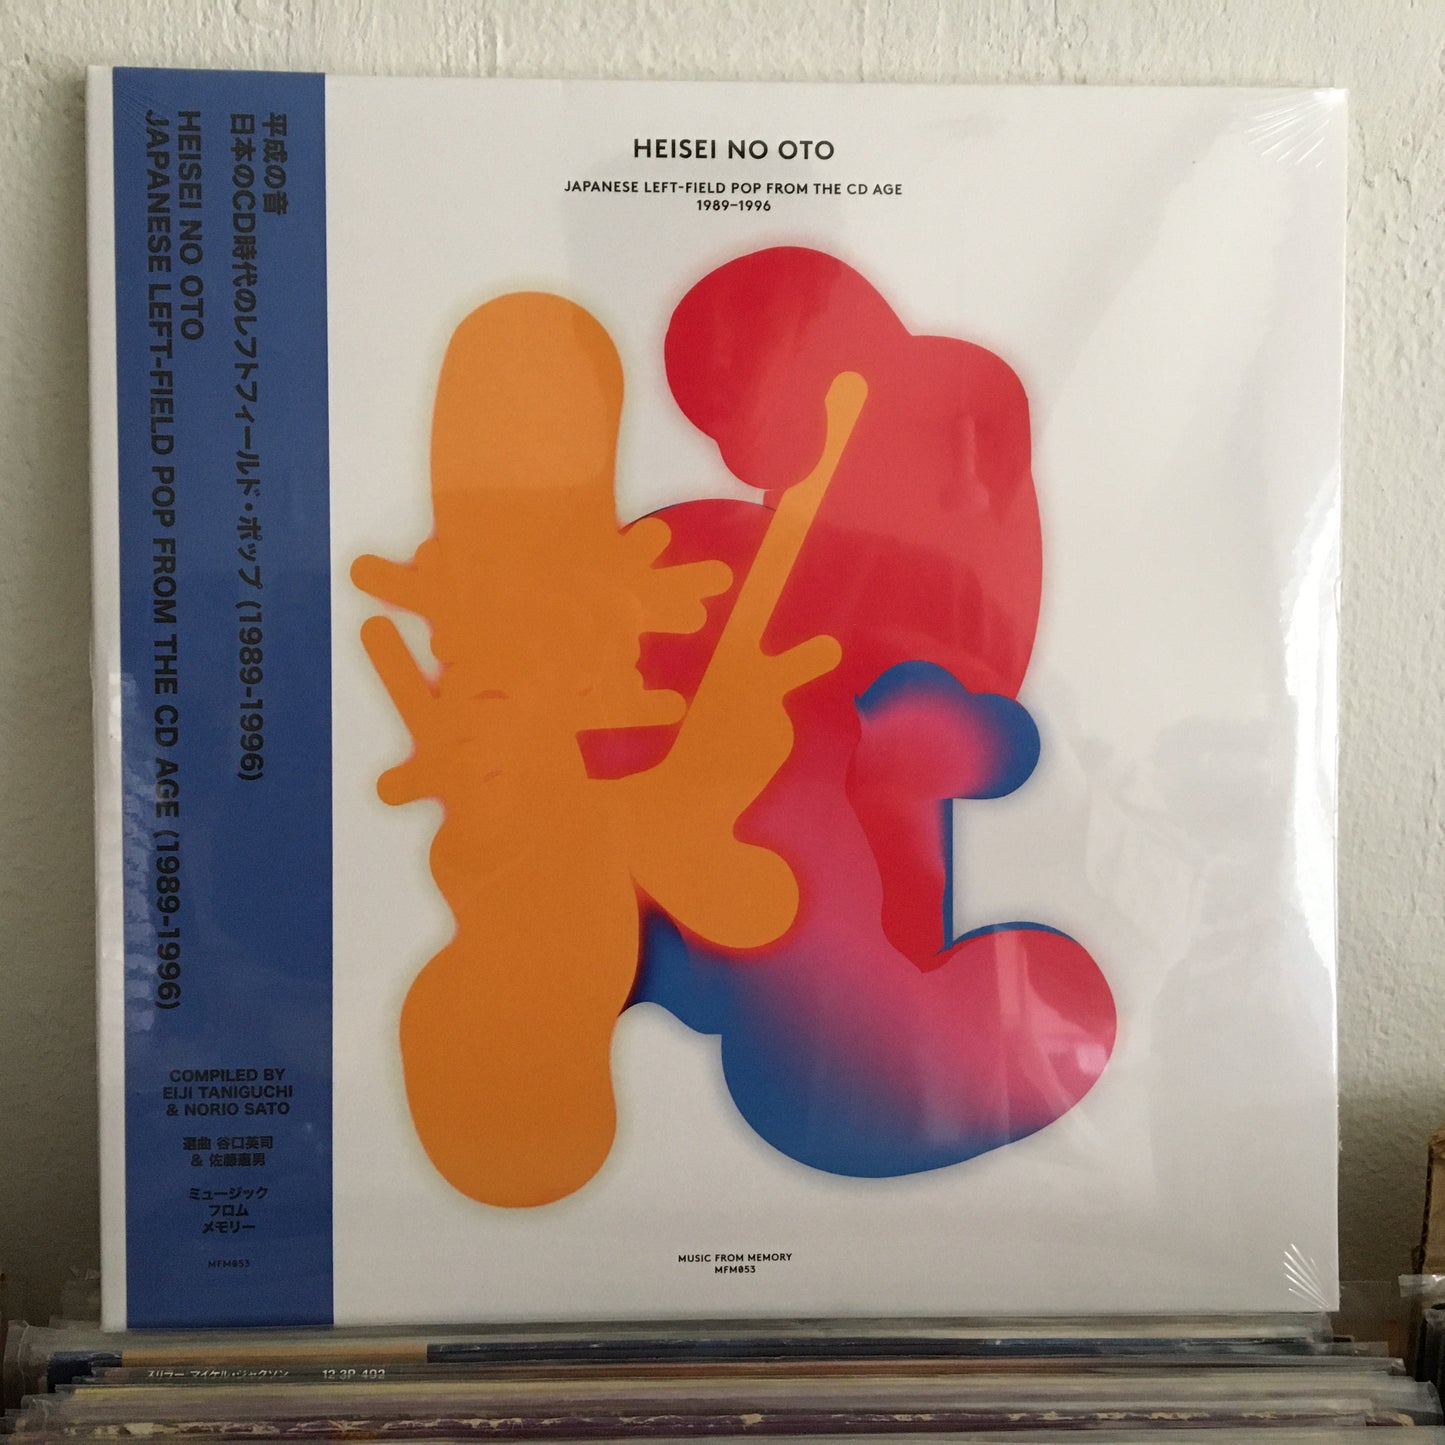 Various – Heisei No Oto (Japanese Left-Field Pop From The CD Age, 1989-1996)